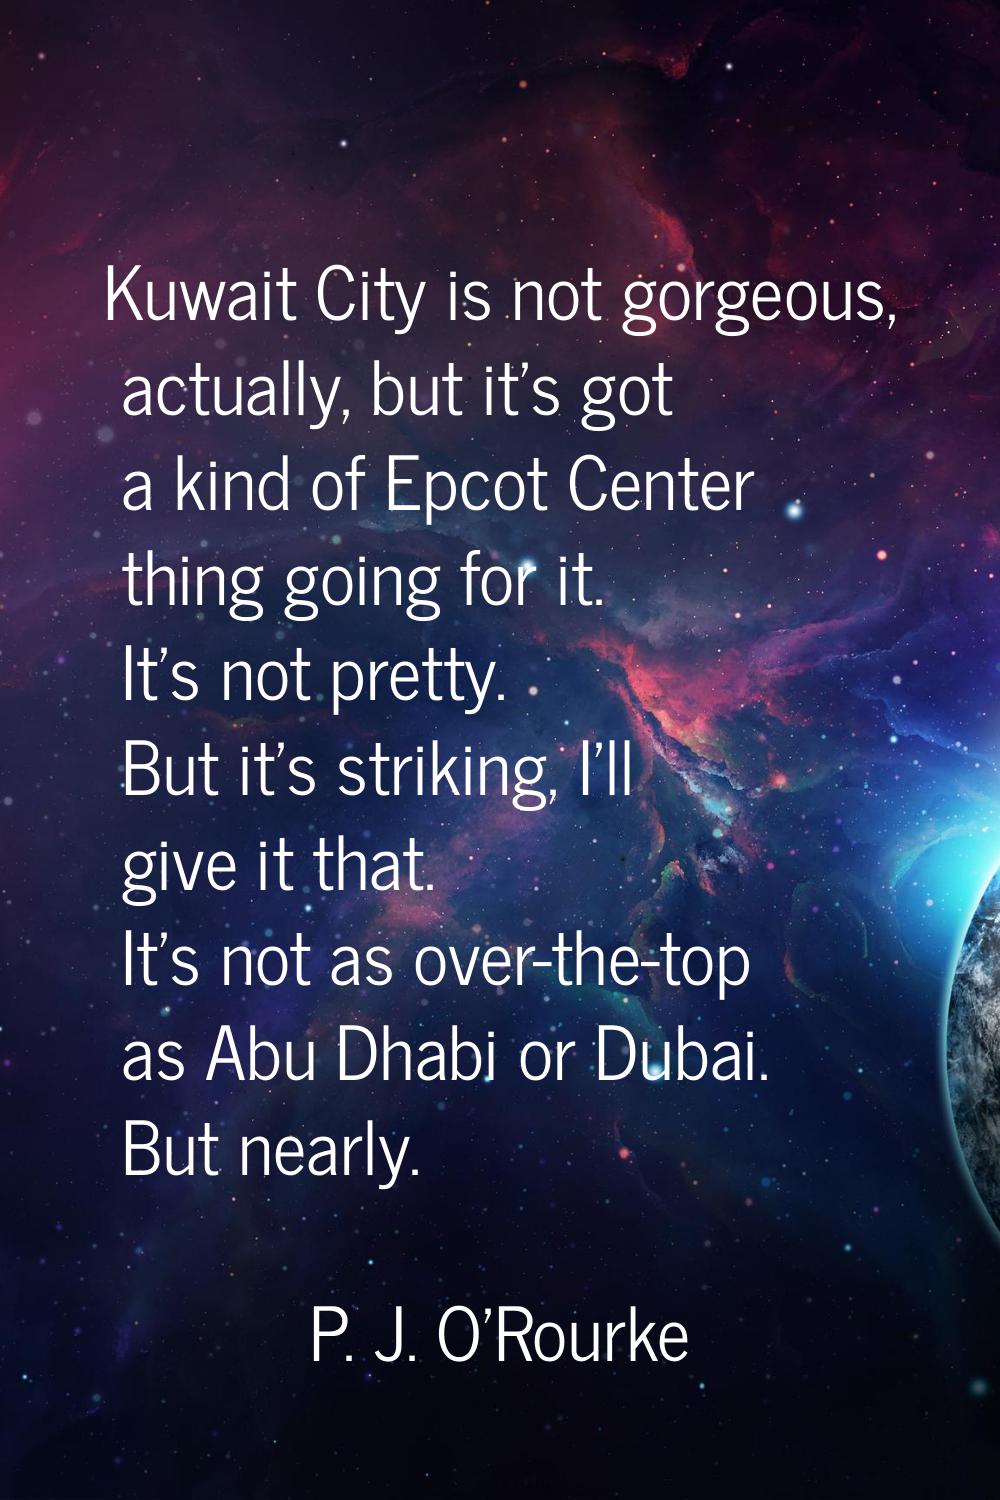 Kuwait City is not gorgeous, actually, but it's got a kind of Epcot Center thing going for it. It's